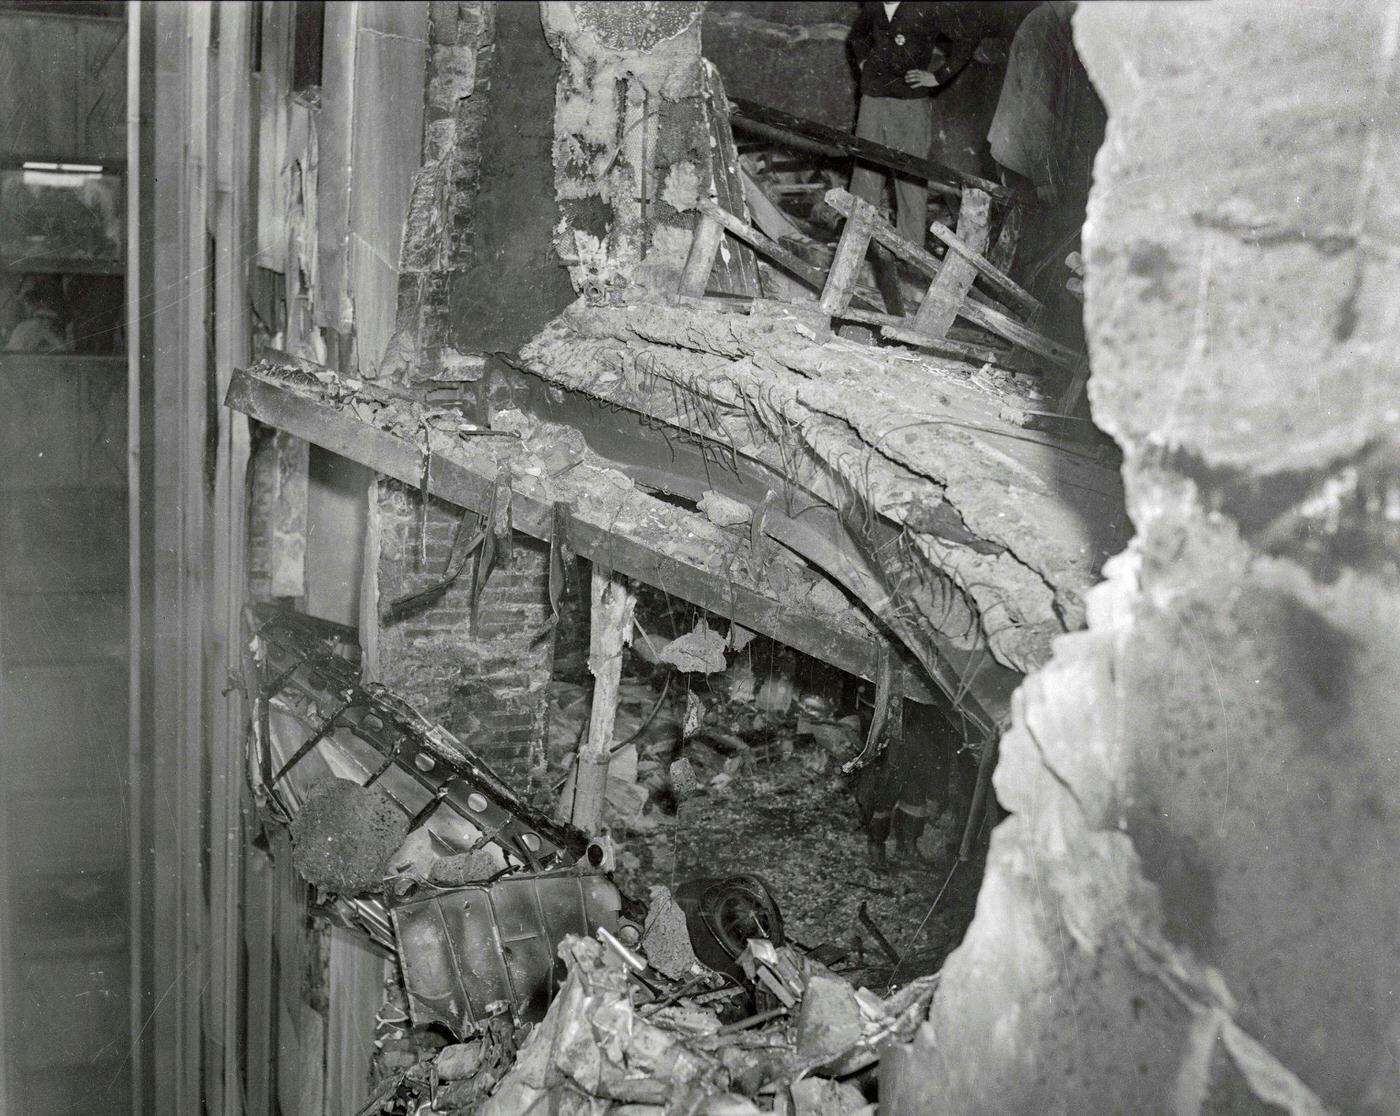 The Wreckage From A Bomber Plane Which Crashed Into The Empire State Building In New York City